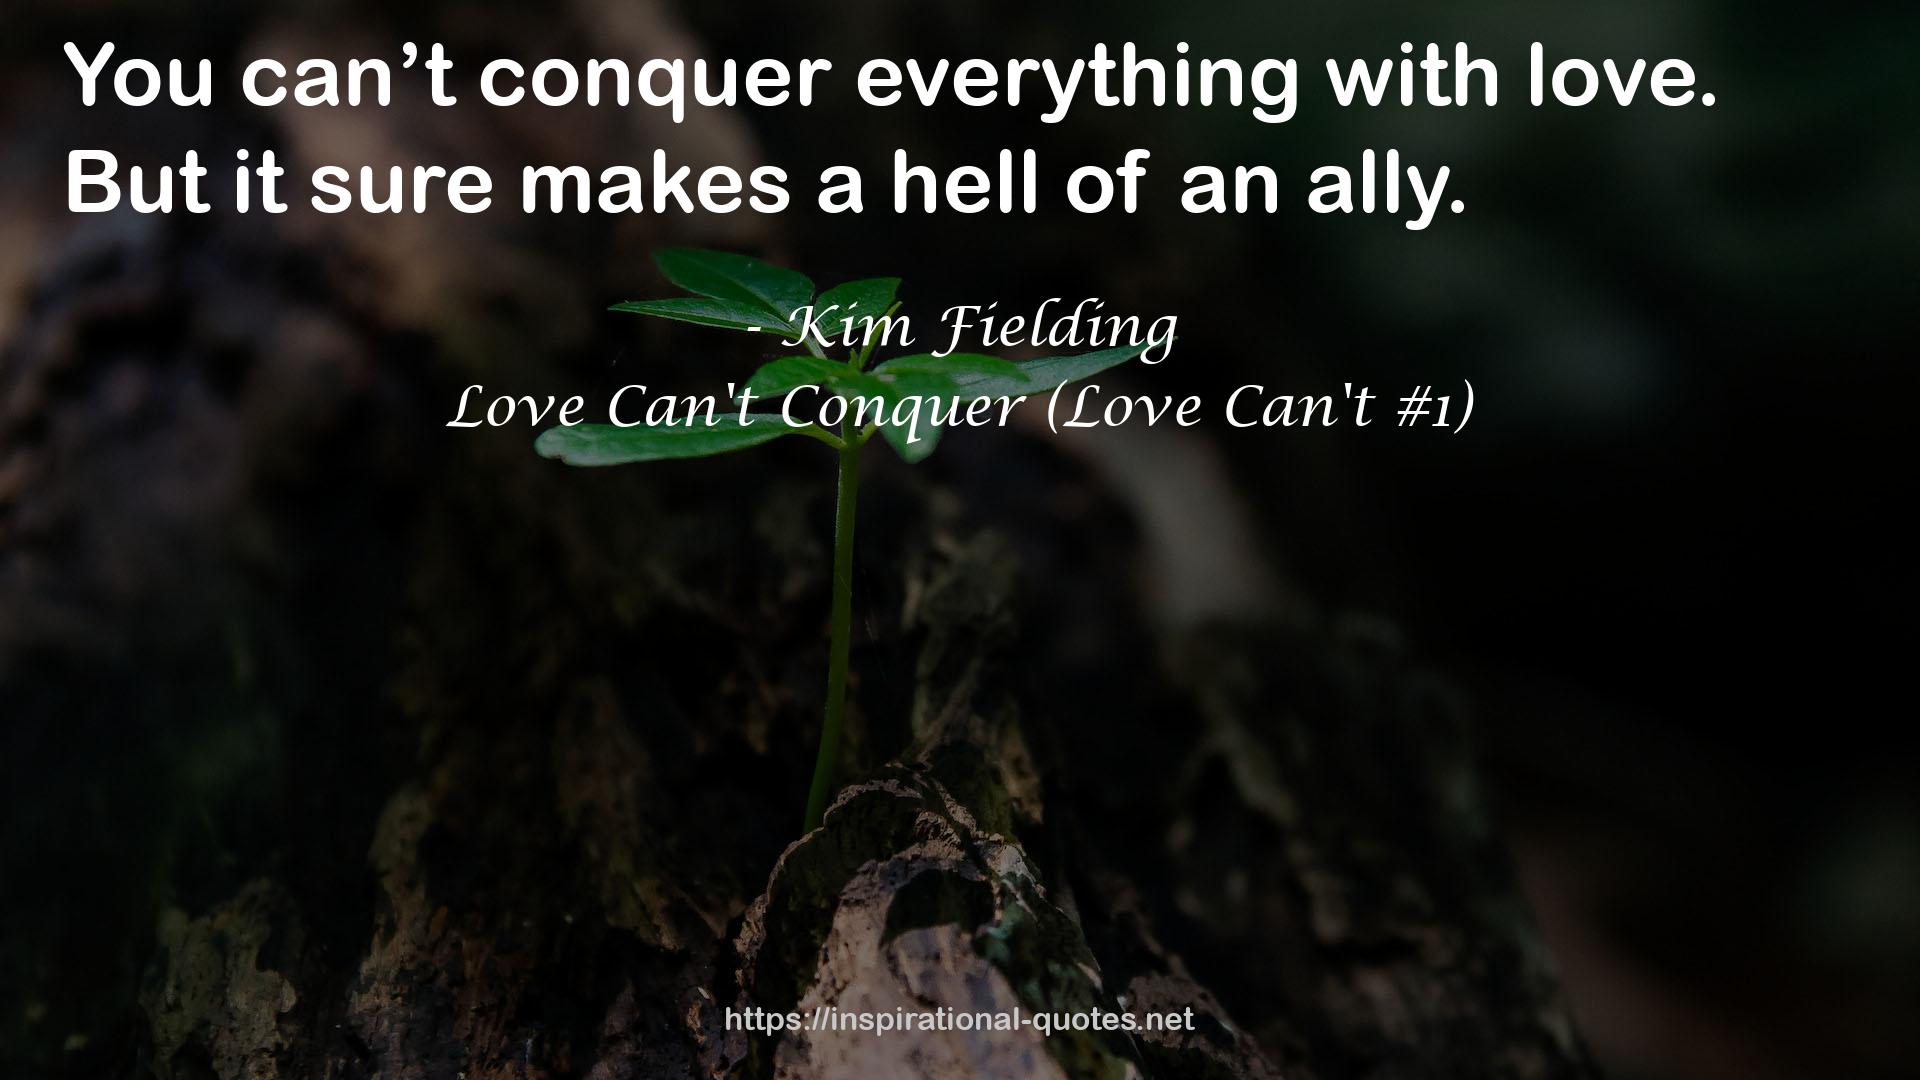 Love Can't Conquer (Love Can't #1) QUOTES